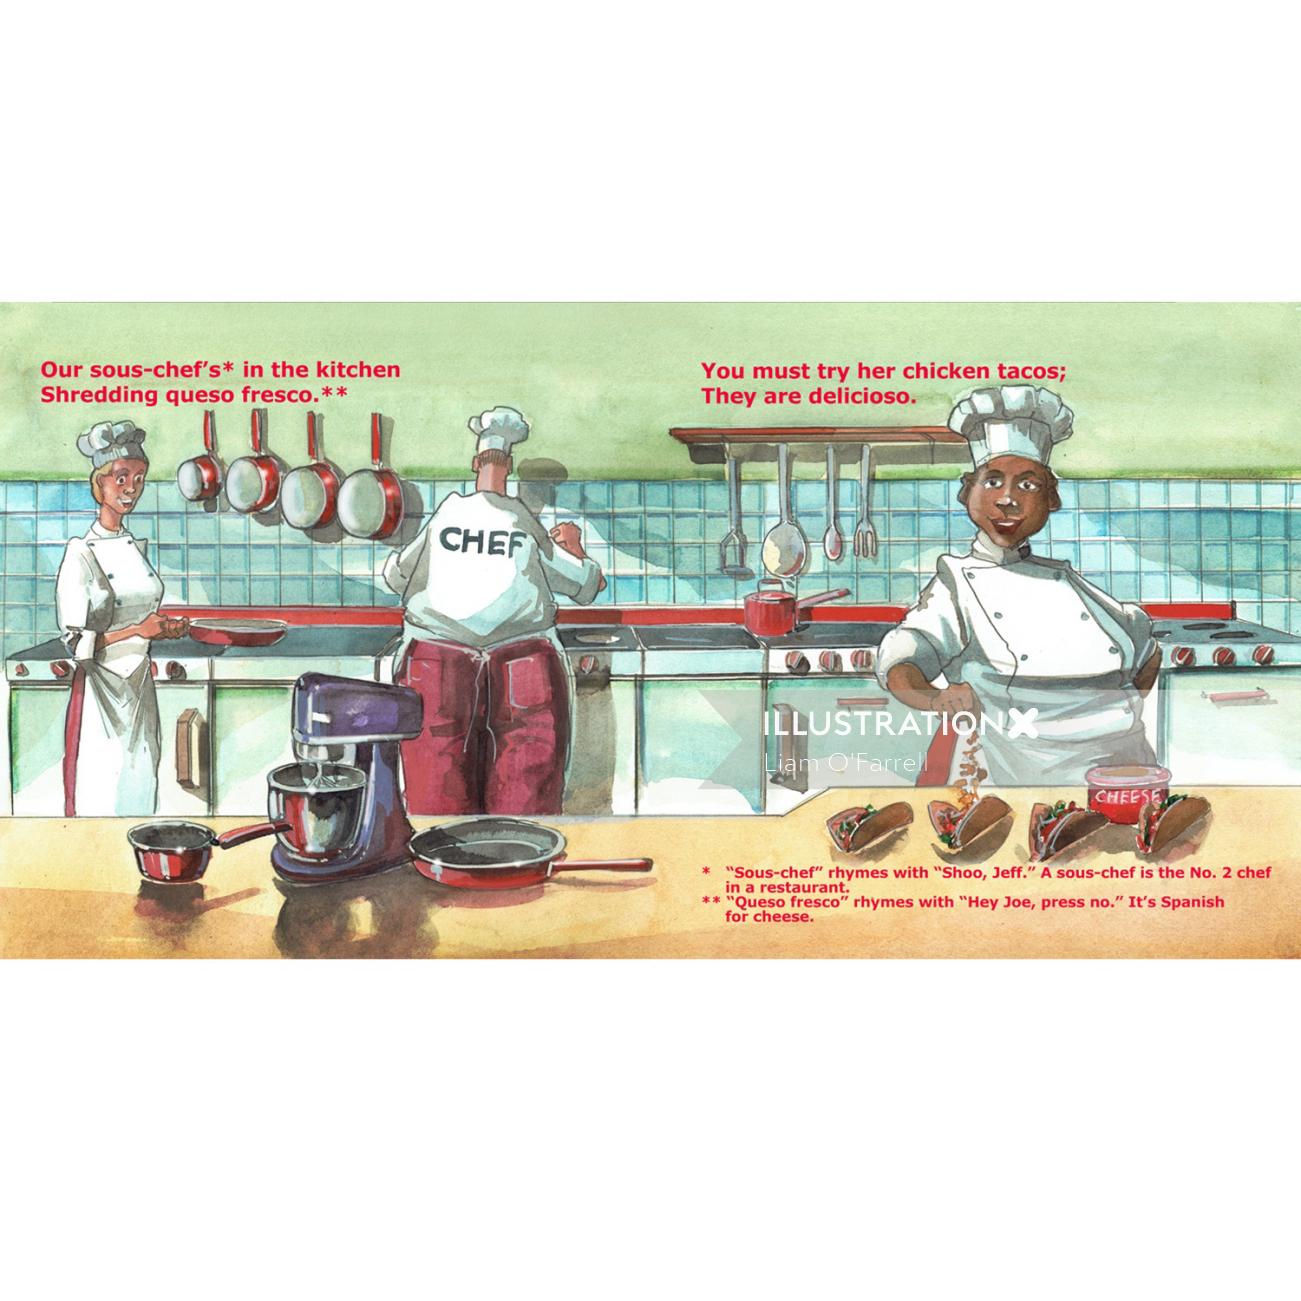 About a hospital kitchen chef editorial illustration